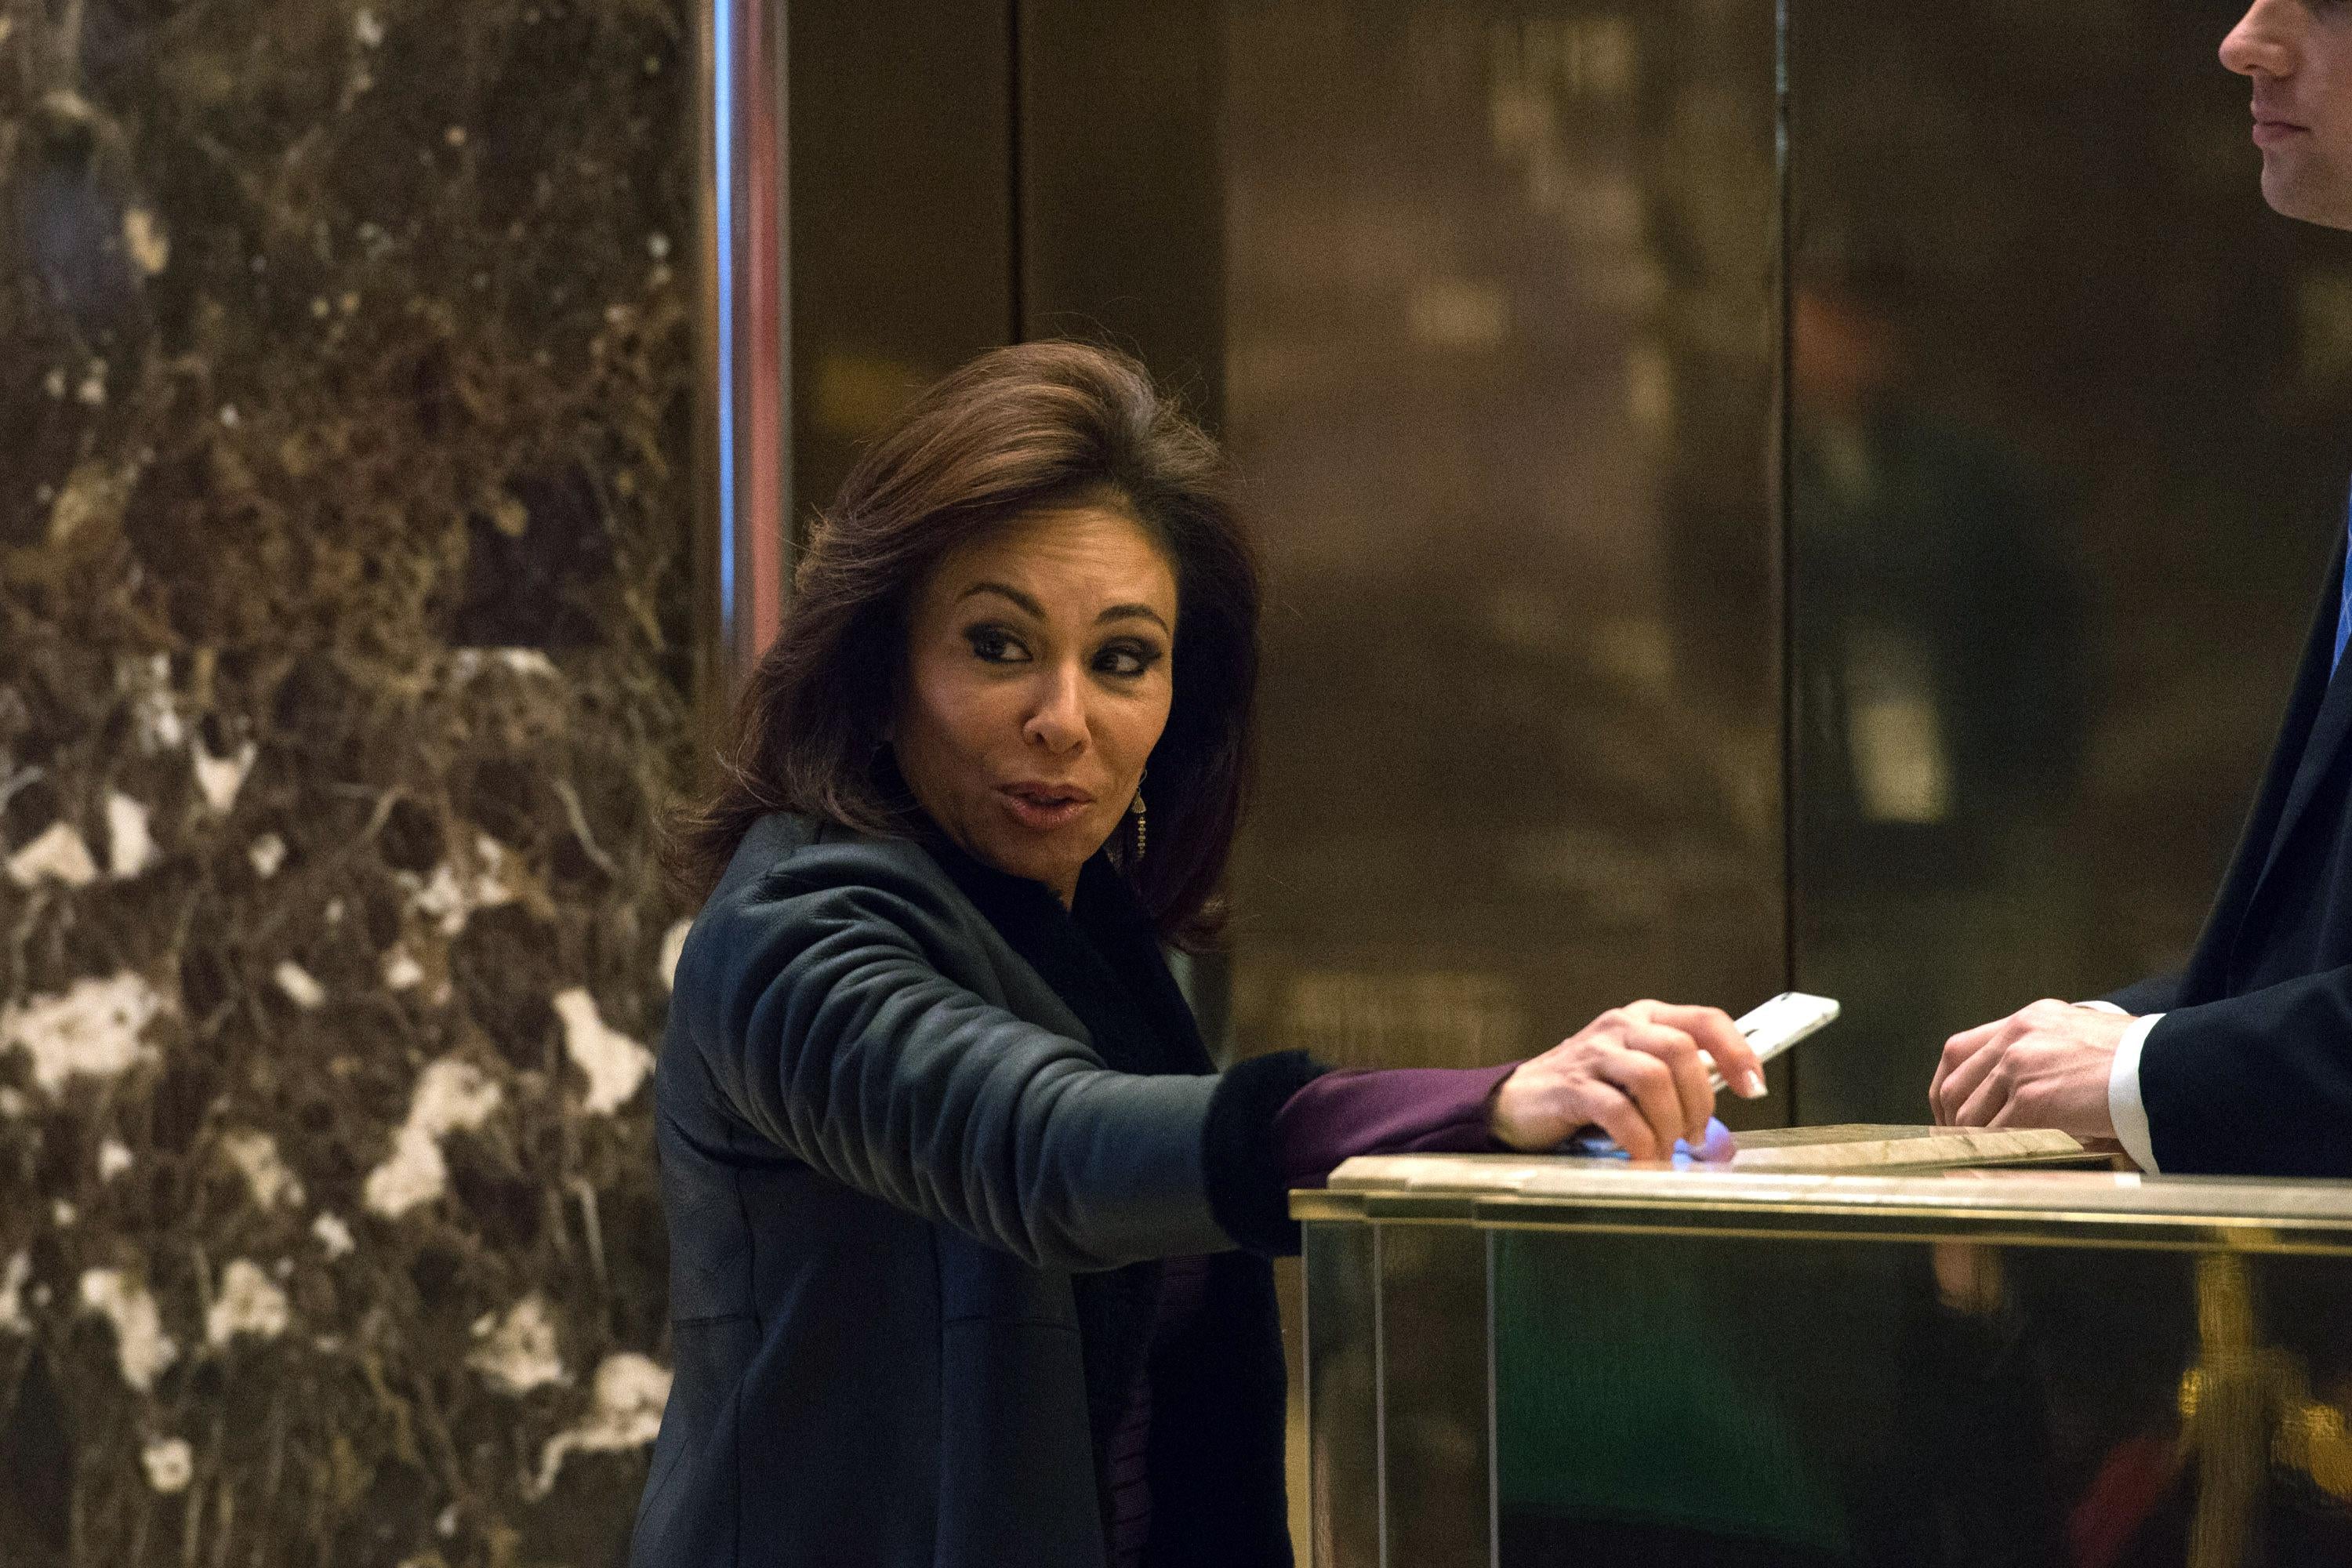 Jeanine Pirro leans against a counter in the lobby, holding her phone